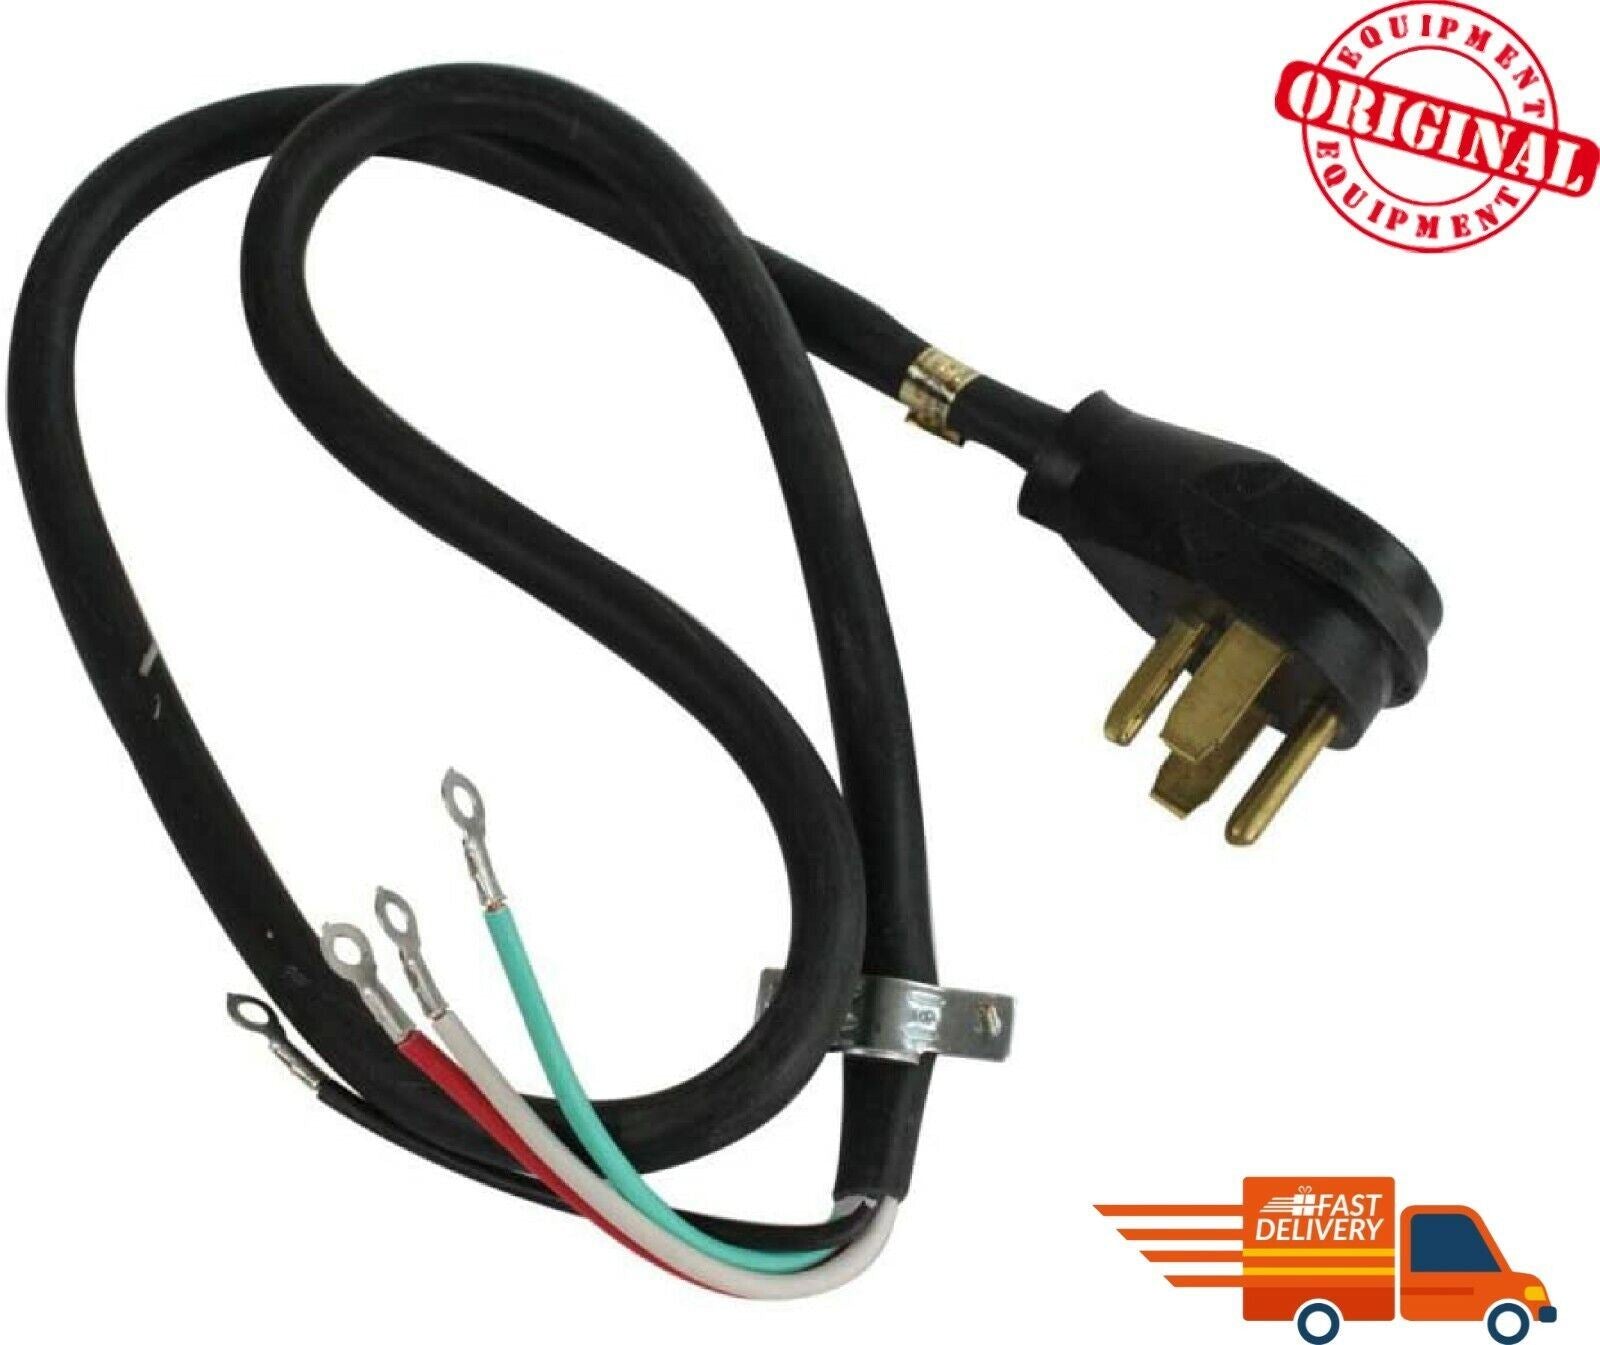 New OEM Genuine Whirlpool PT400L Dryer Power Cord 4' 4 Prong Cord